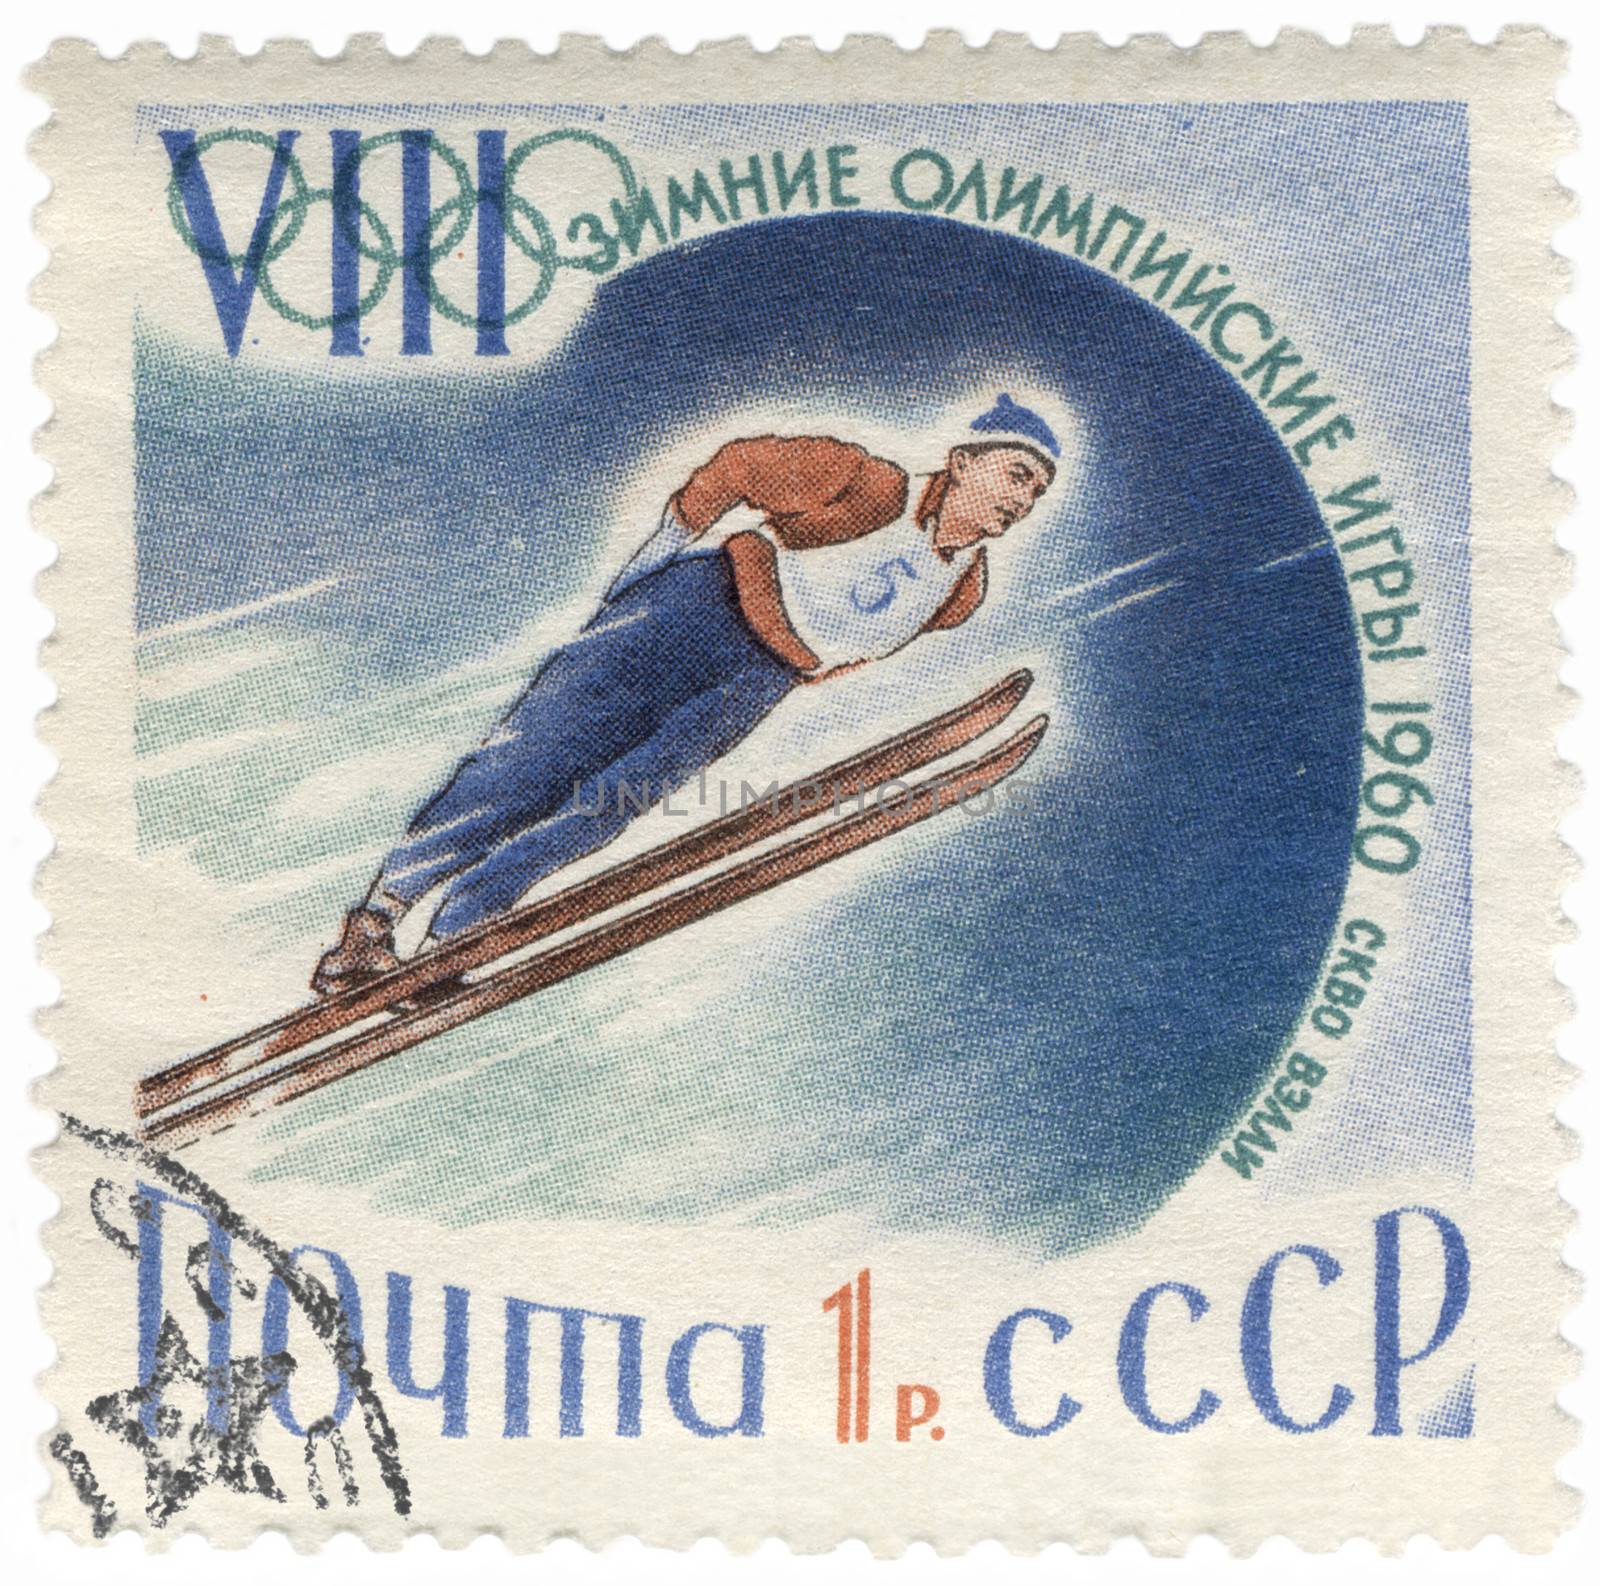 USSR - CIRCA 1960: A post stamp printed in the USSR shows flying skier, dedicated to the Winter Olympic Games in Squaw Valley, series, circa 1960